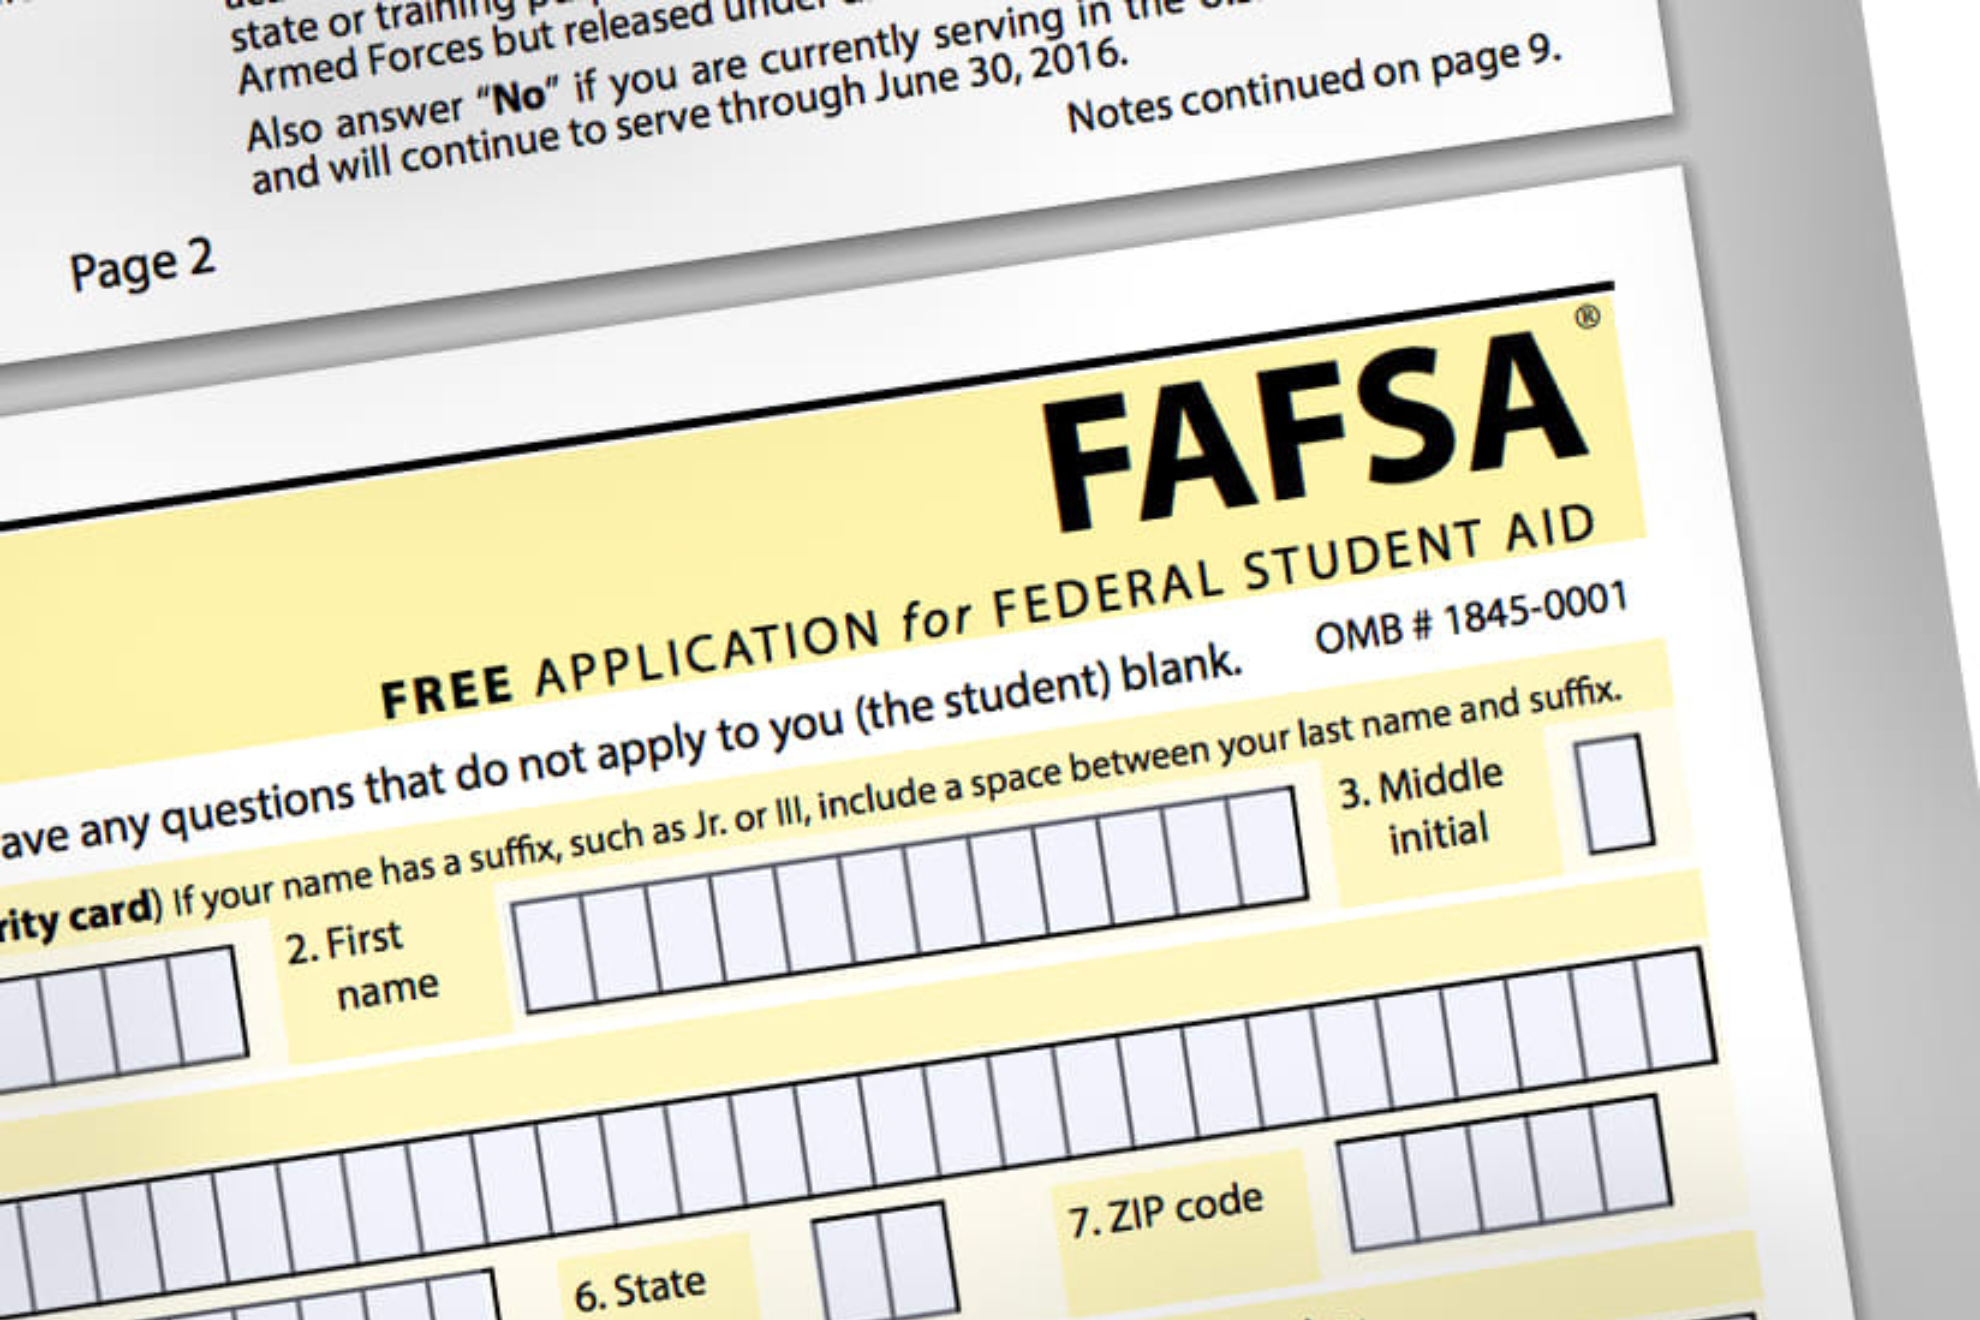 FAFSA Application: How do I find out how much FAFSA will give me?